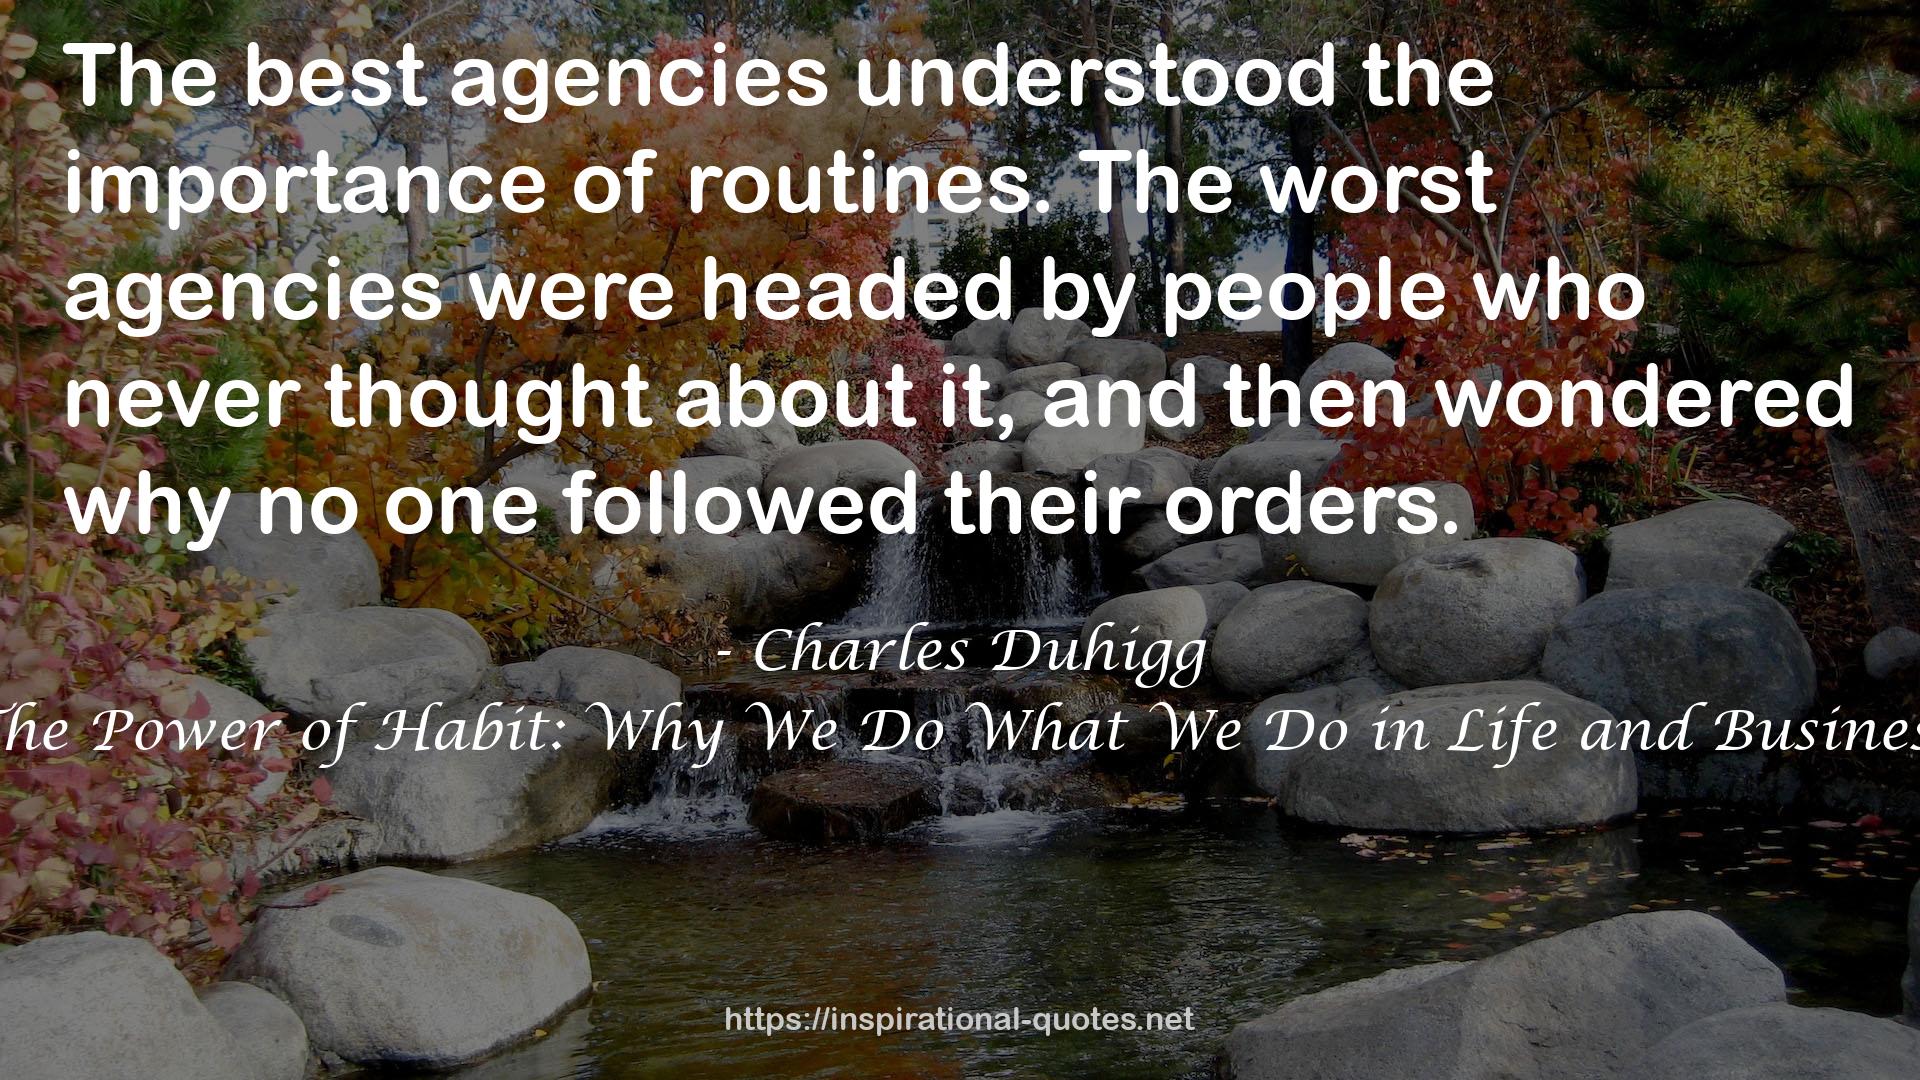 Charles Duhigg QUOTES